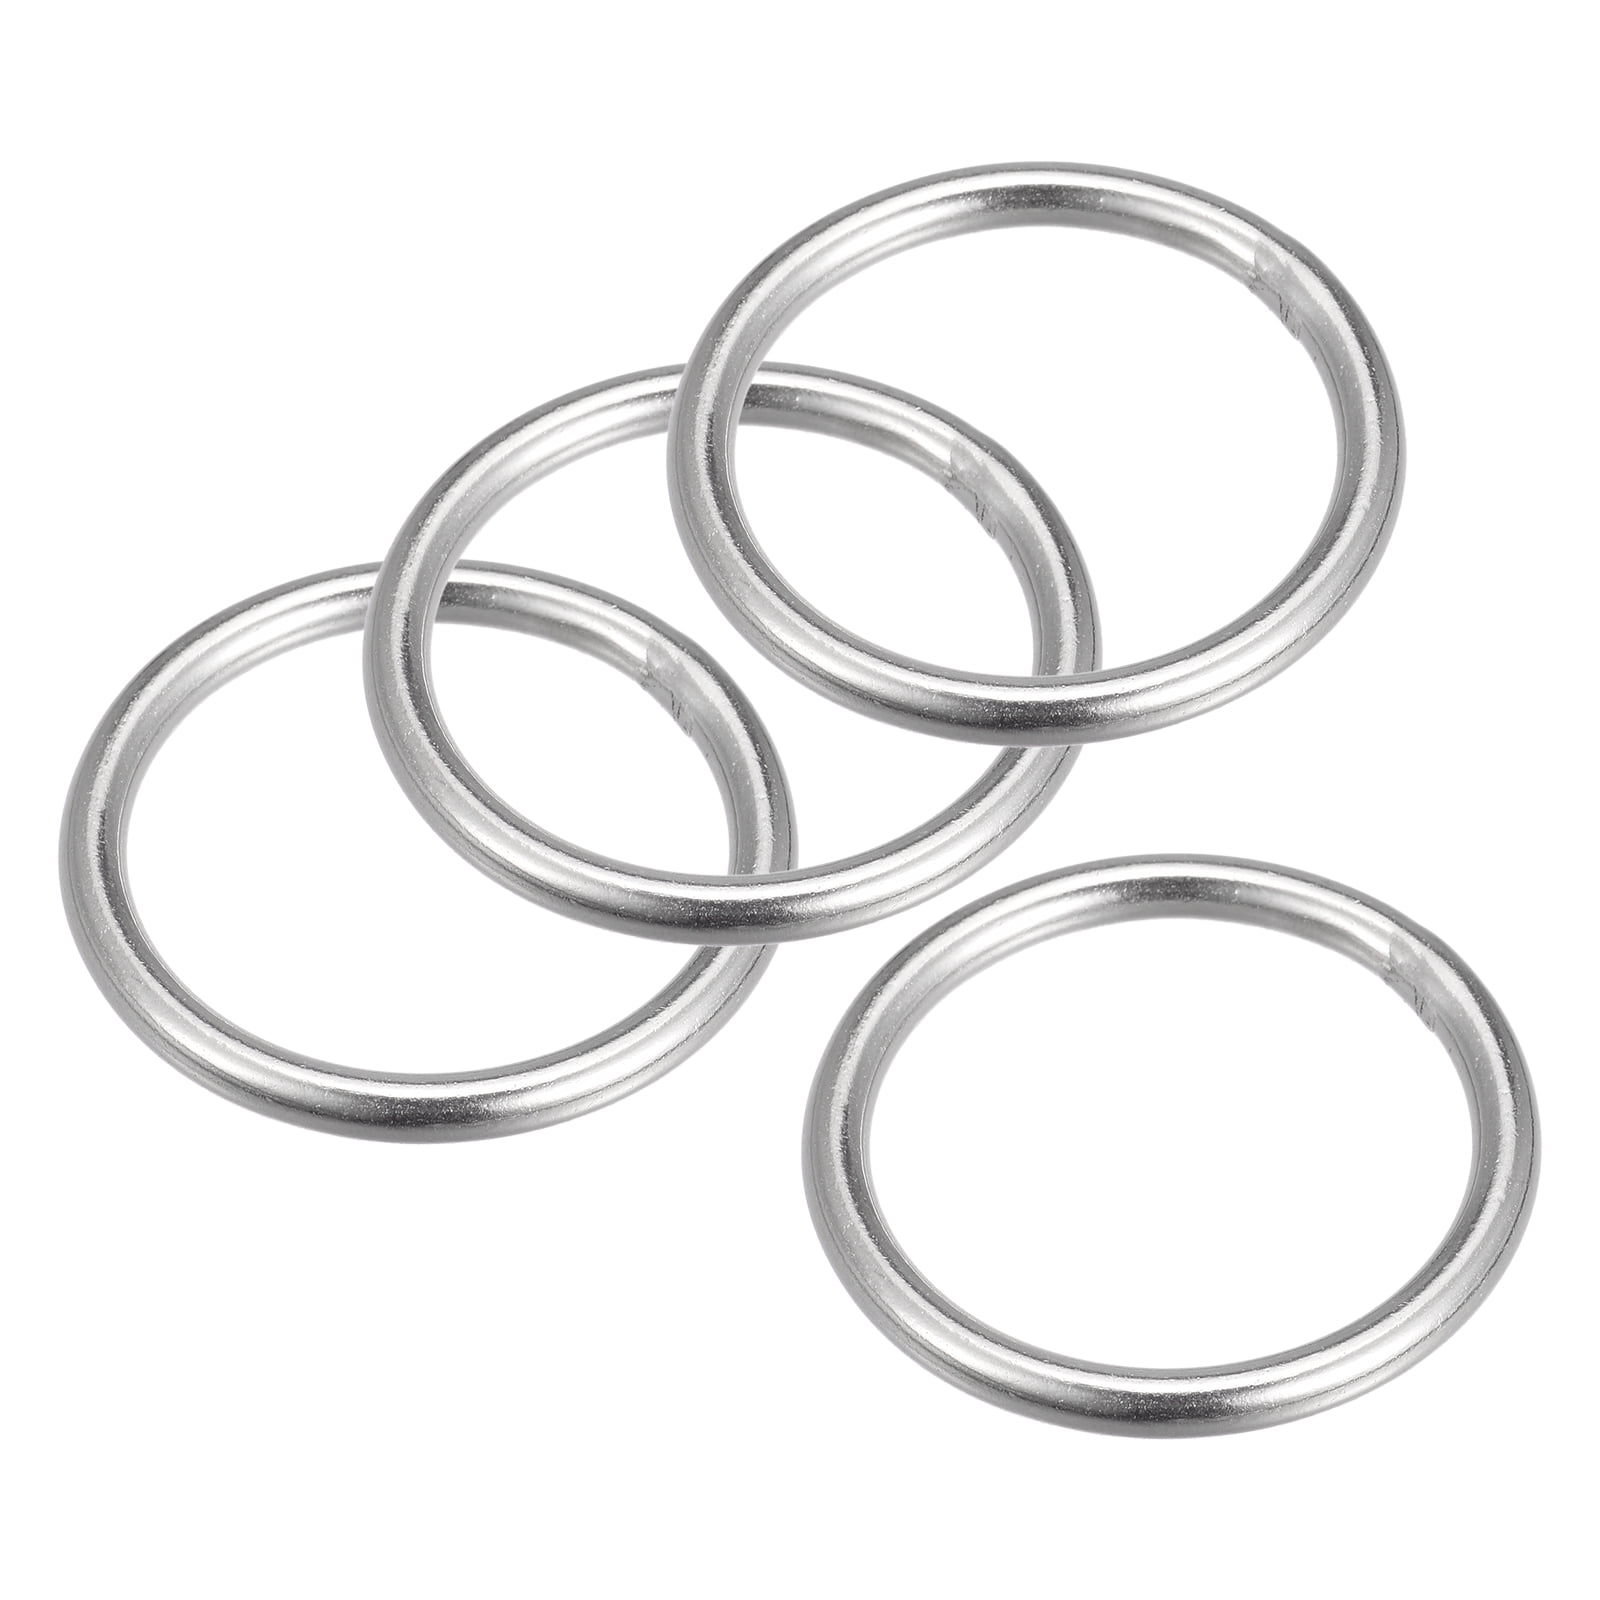 Metal Round Welded O Rings Thick:3mm-16mm / OD:15mm-100mm Stainless Steel  Ring